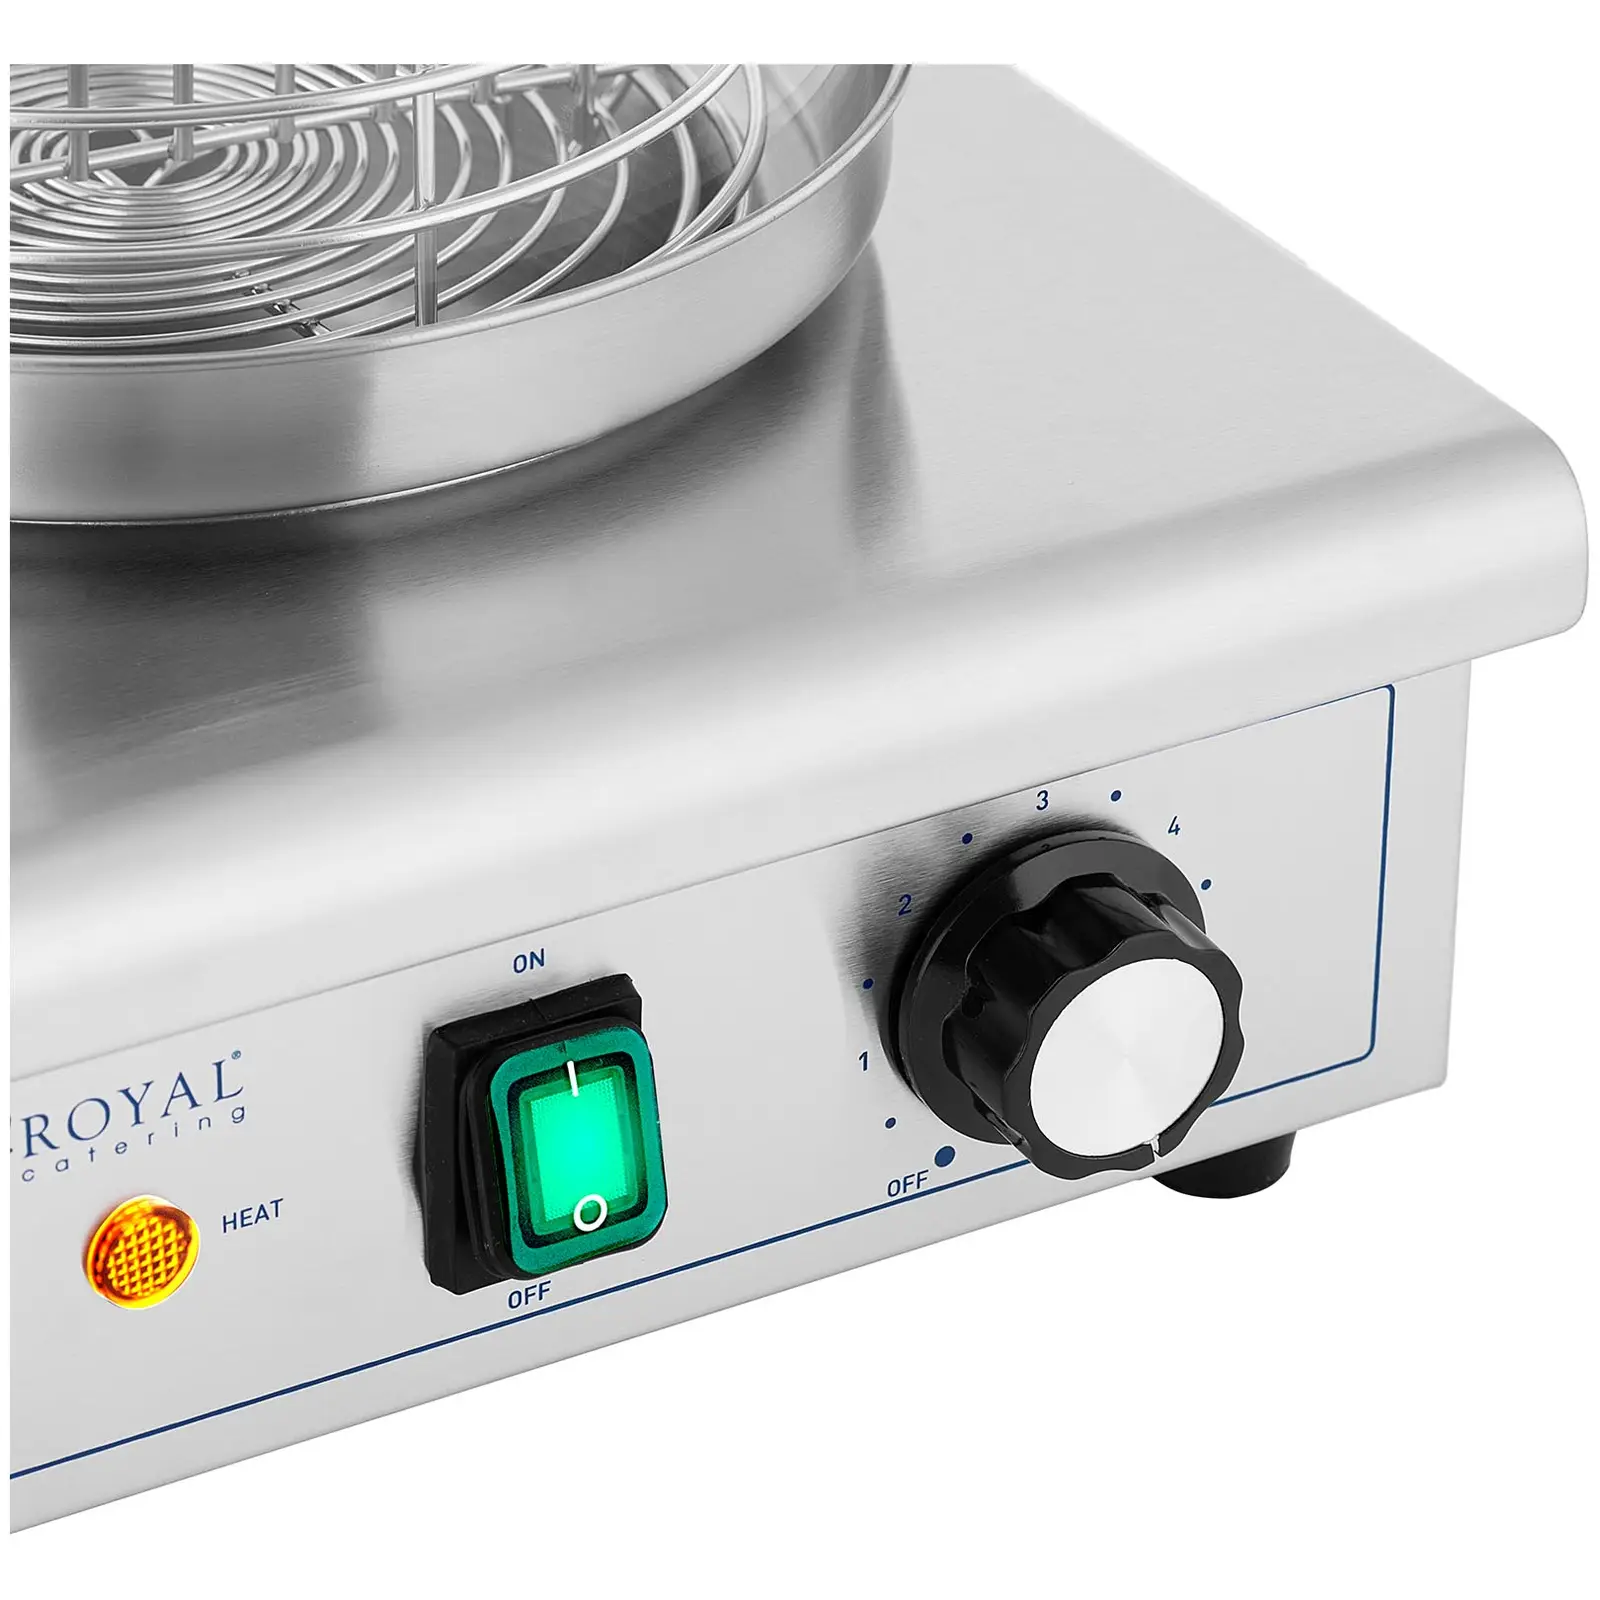 Hot Dog Steamer - 450 W - Royal Catering